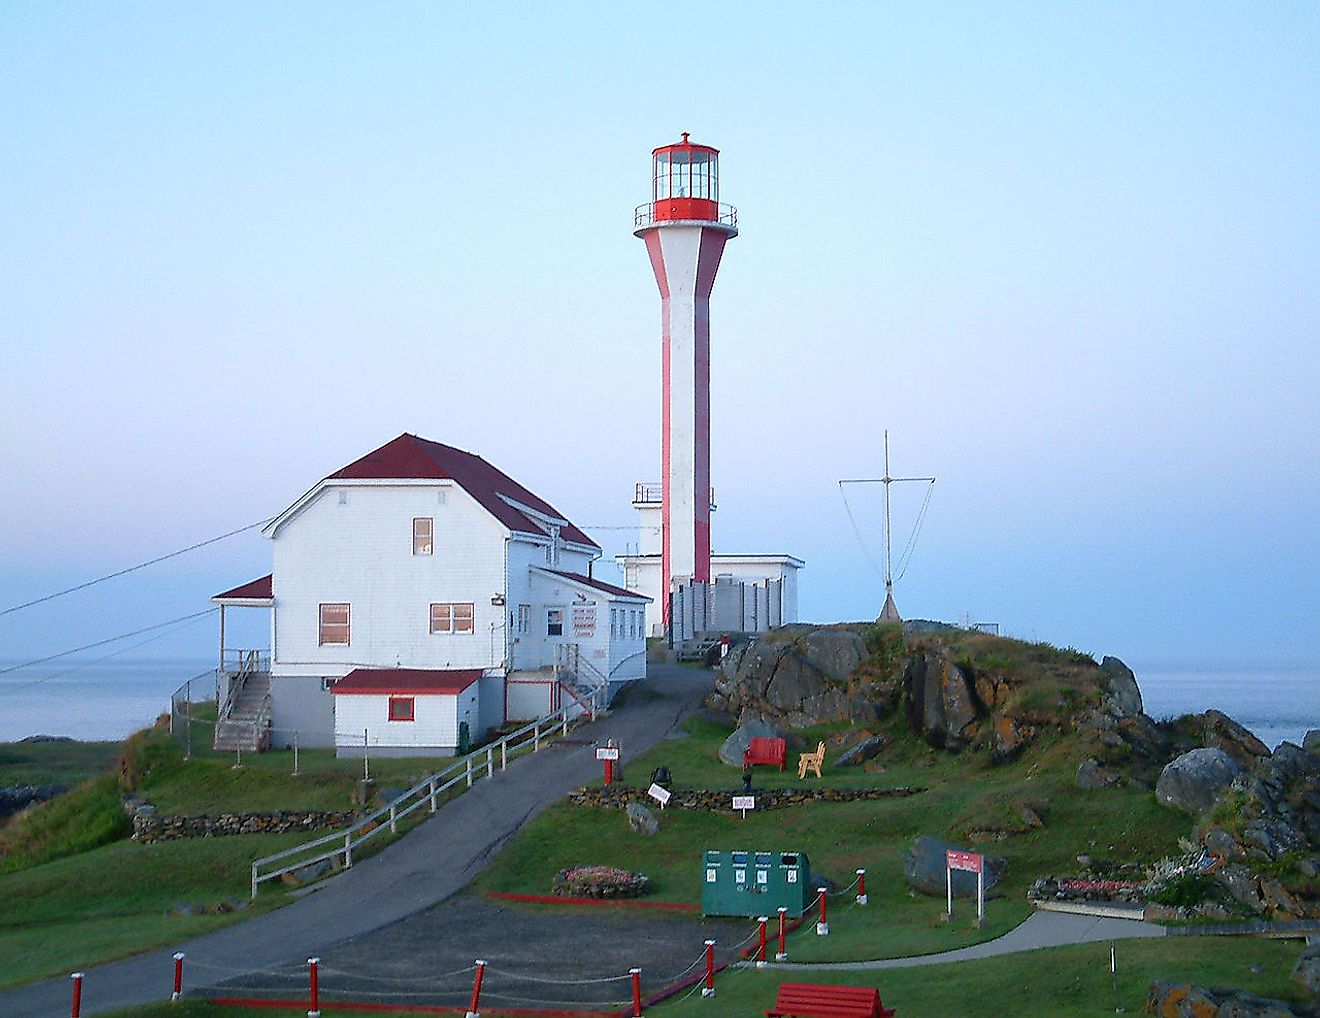 Cape Forchu Lighthouse. Image credit: James Somers/Public domain